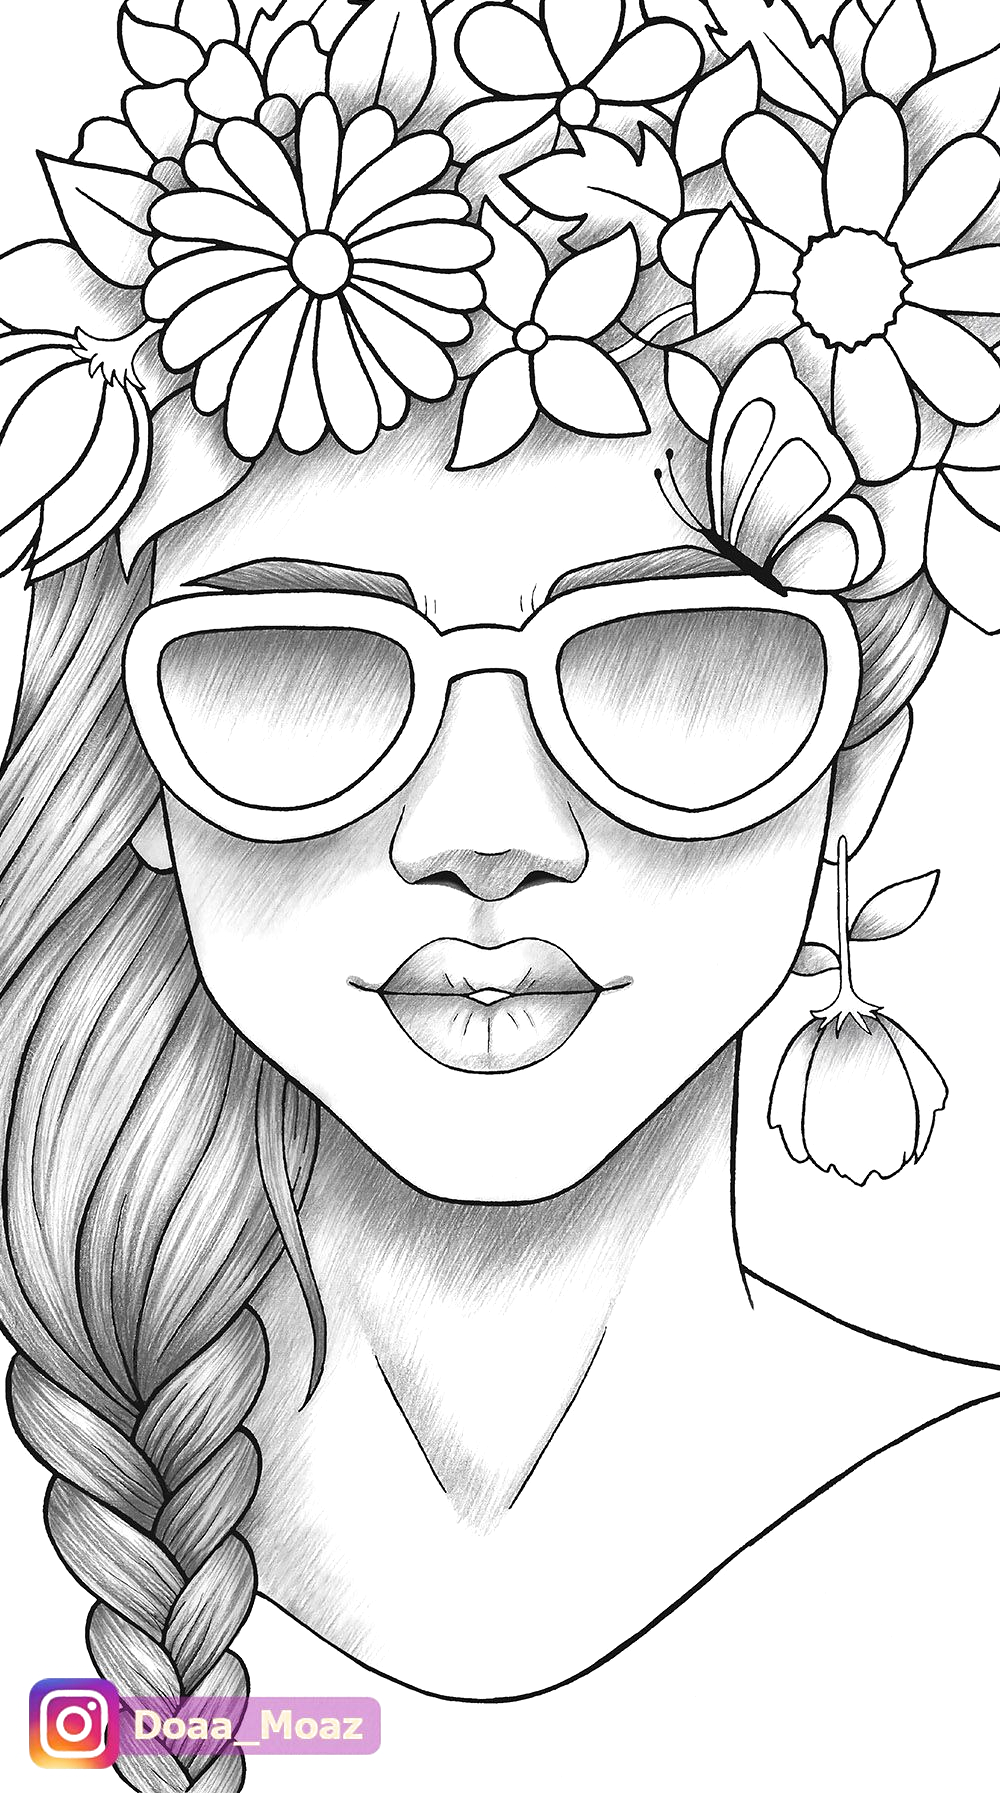 115+ Tumblr Coloring Pages: Trendy and Creative Designs 30